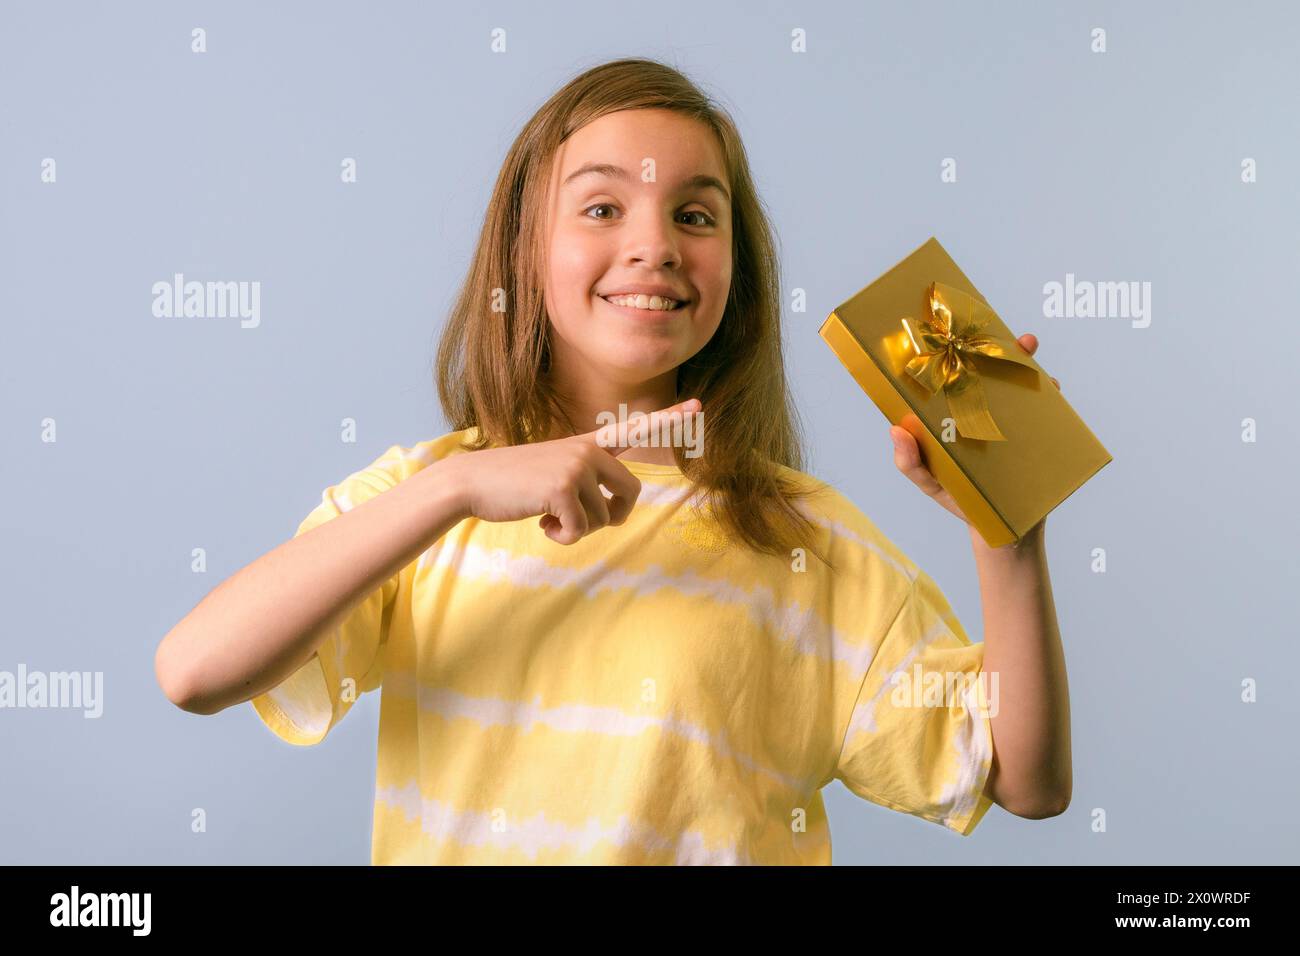 Joyful girl with a gift in her hand. A teenager rejoices at a gift in a gold box. Unexpected surprise Stock Photo